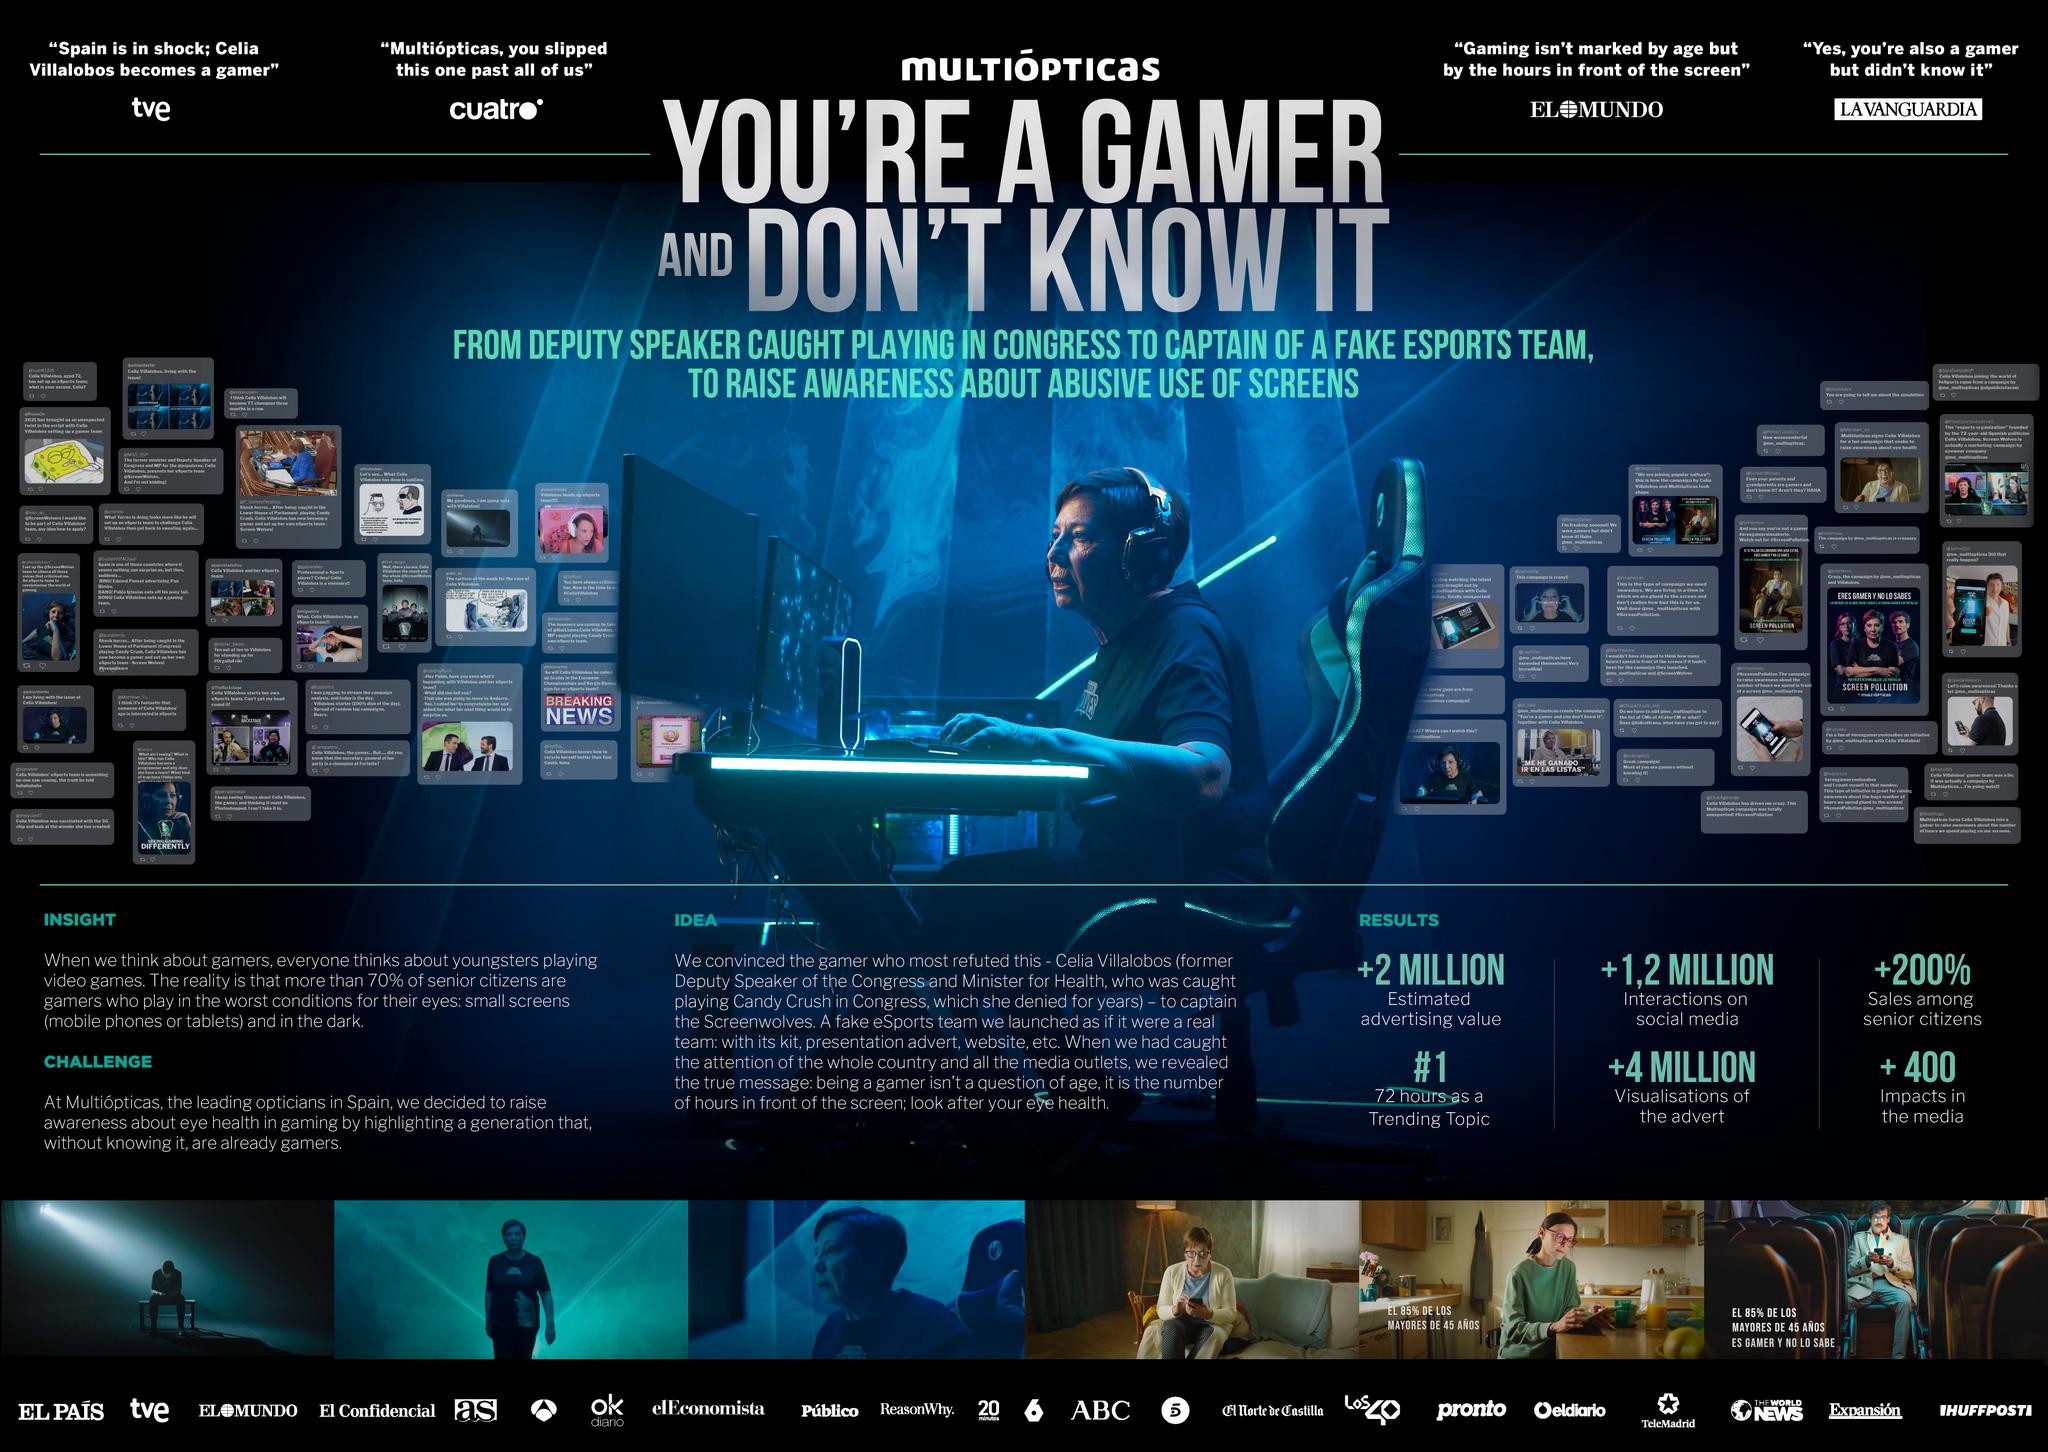 You are a gamer and you don’t know it